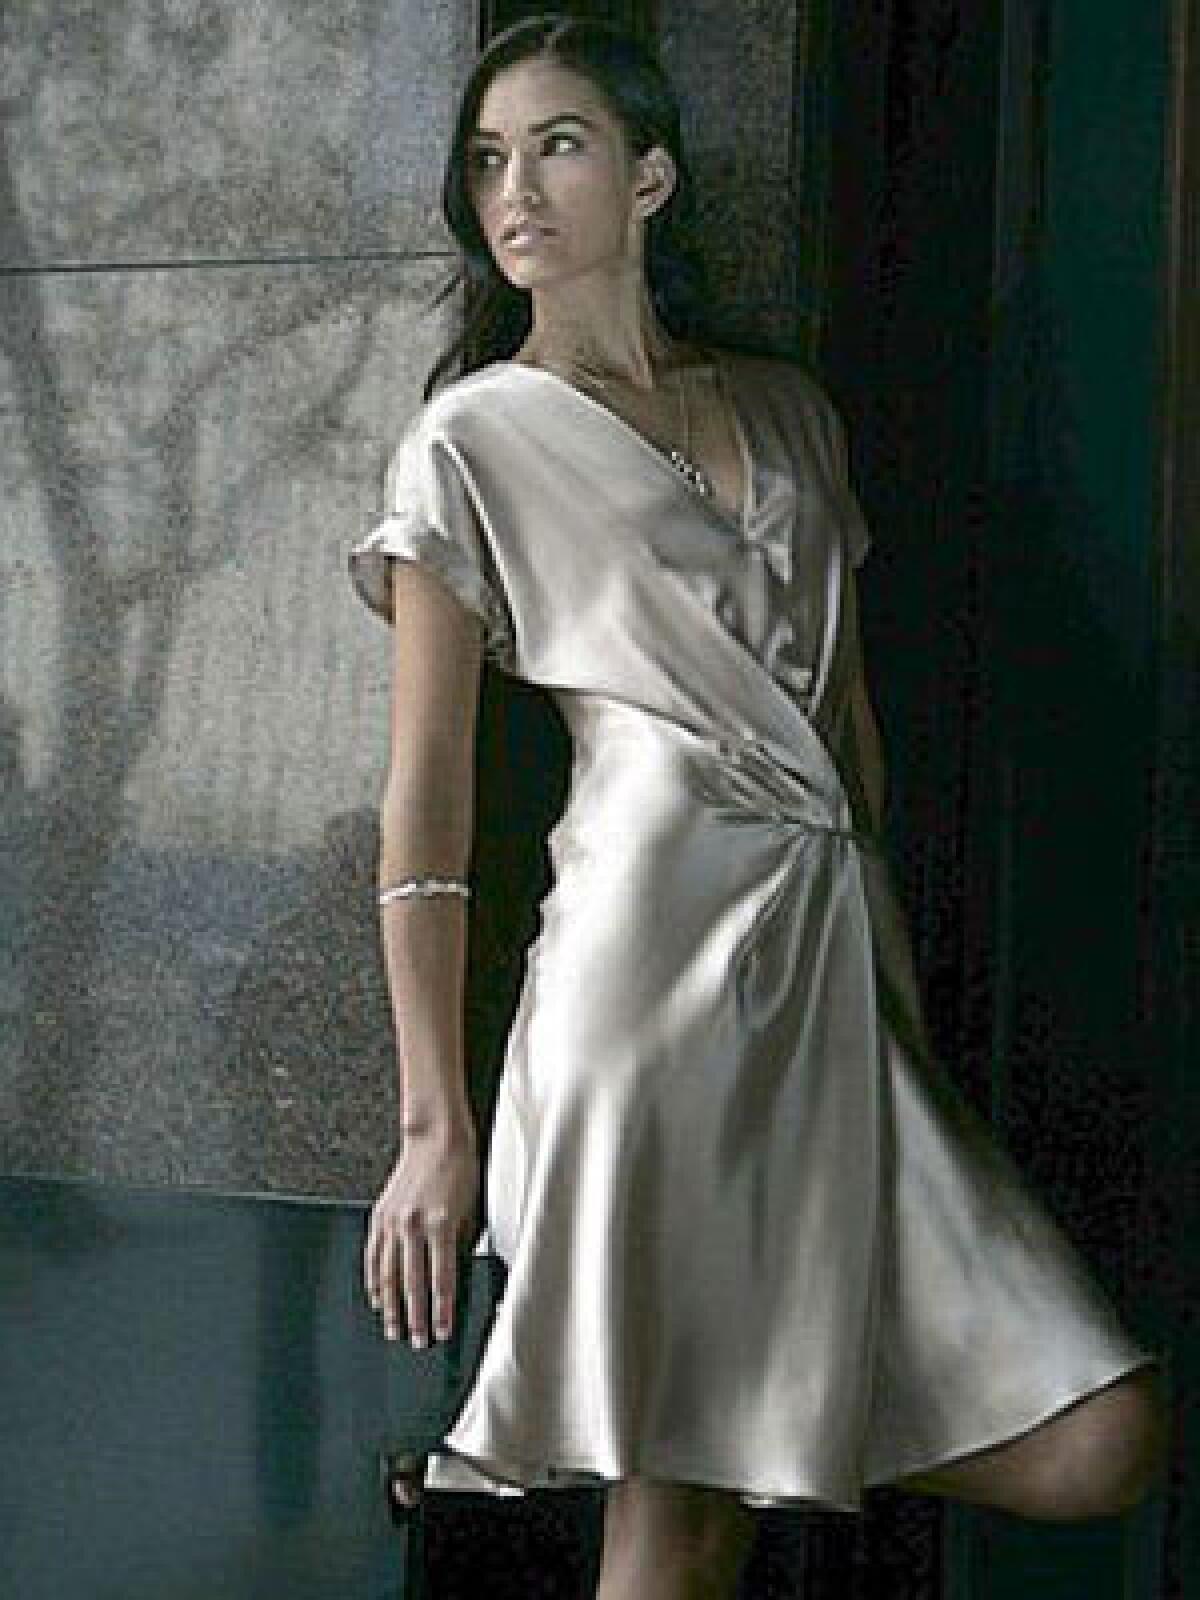 SILVERY SMOOTH: Banana Republic Heritage runway pleat dress, $130 at www.bananarepublic.com; Alex Woo Sweni chunky horn bangle in sterling silver, $448, and large horn pendant in sterling silver, $318, at www.alexwoo.com.